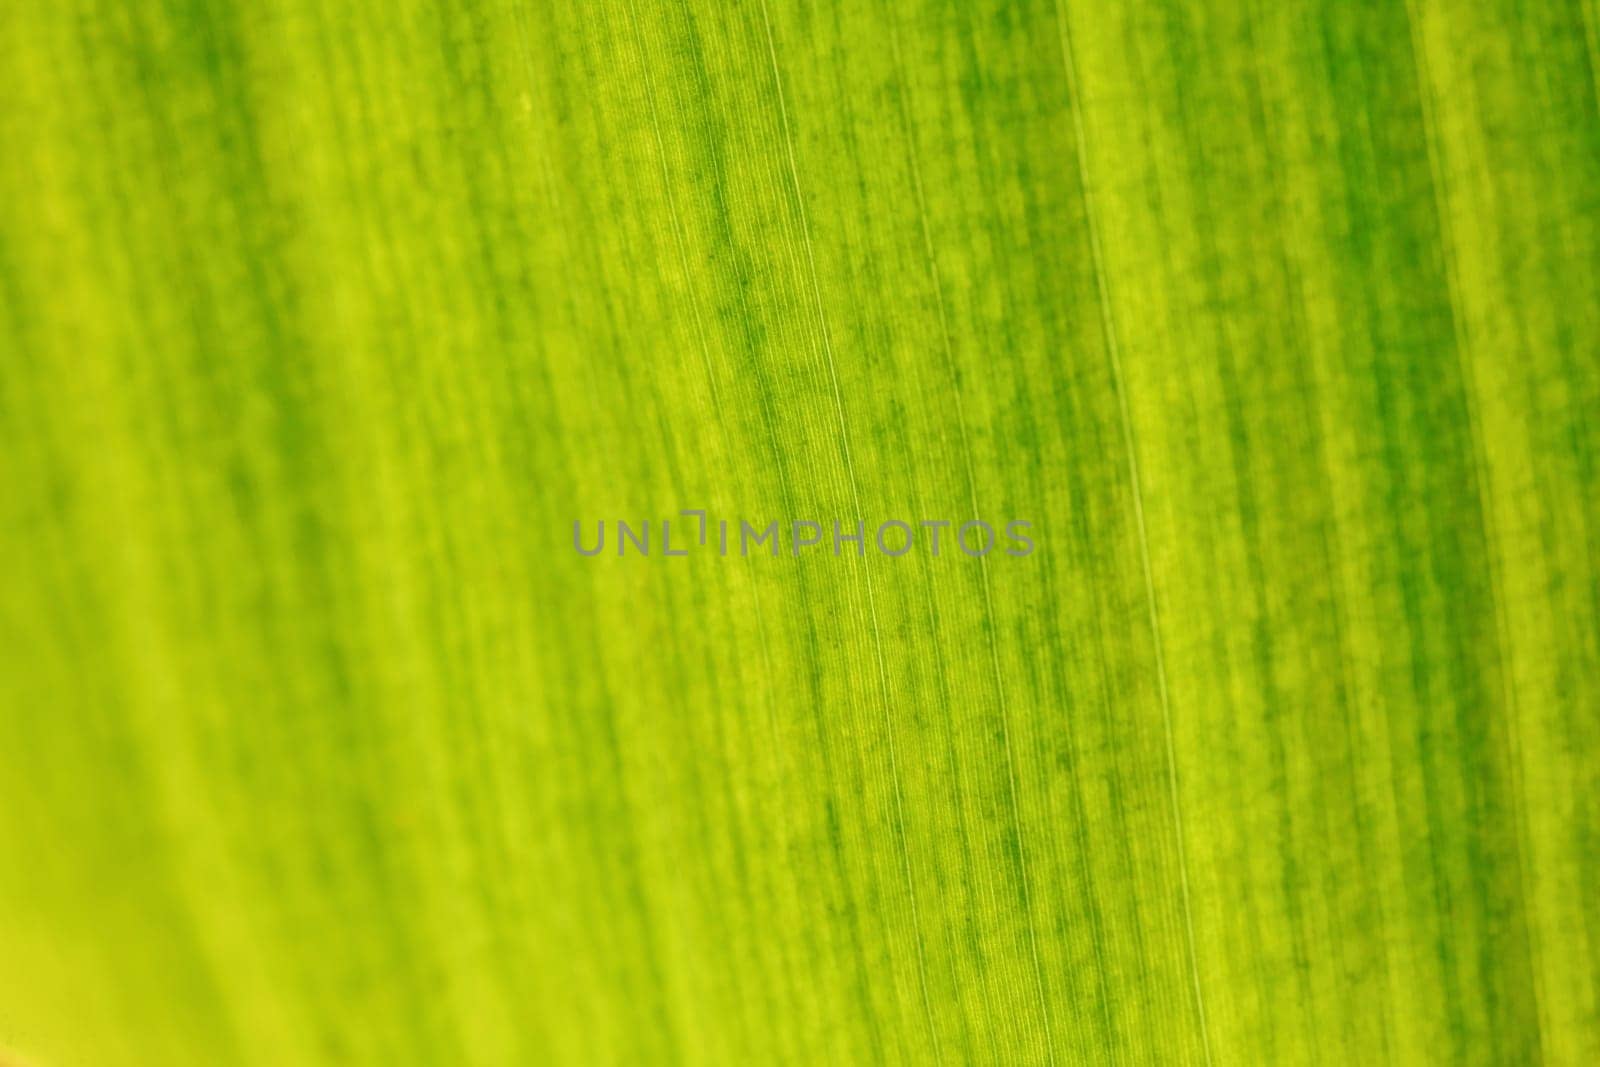 Shallow depth of field photo - only few fibers in focus. Banana tree leaf lit by sun from other side. Abstract tropical organic background.